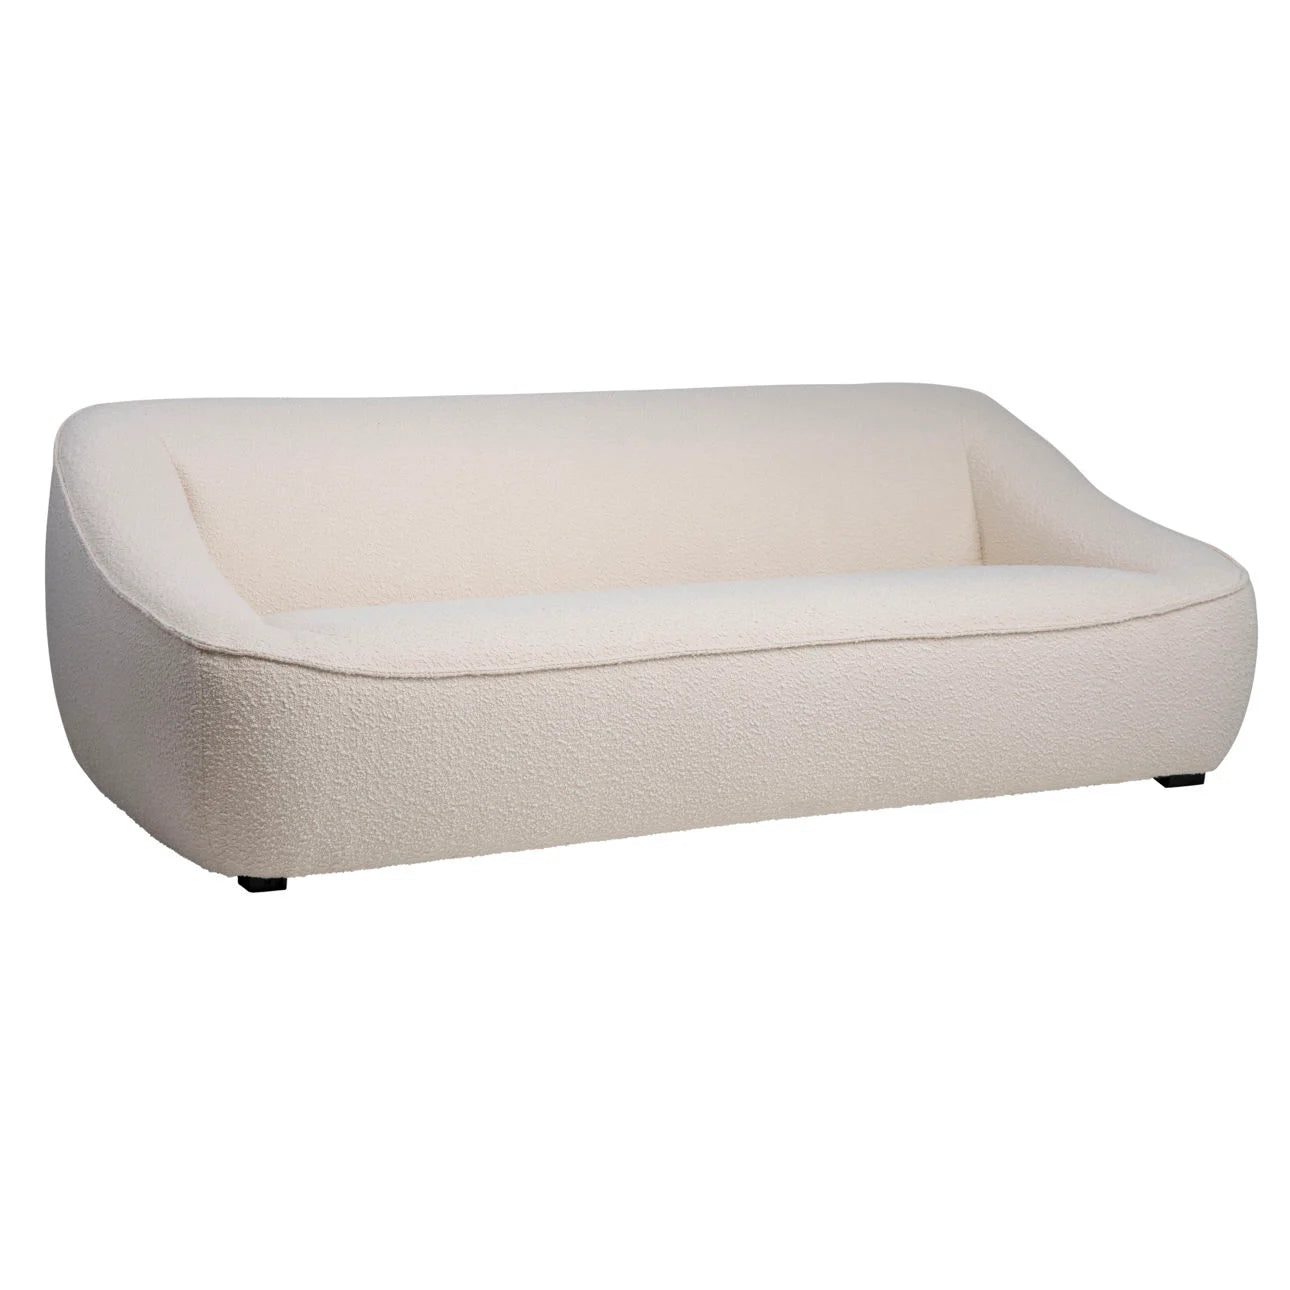 marcella-sofa-in-white-poly-blend-boucle-upholstery